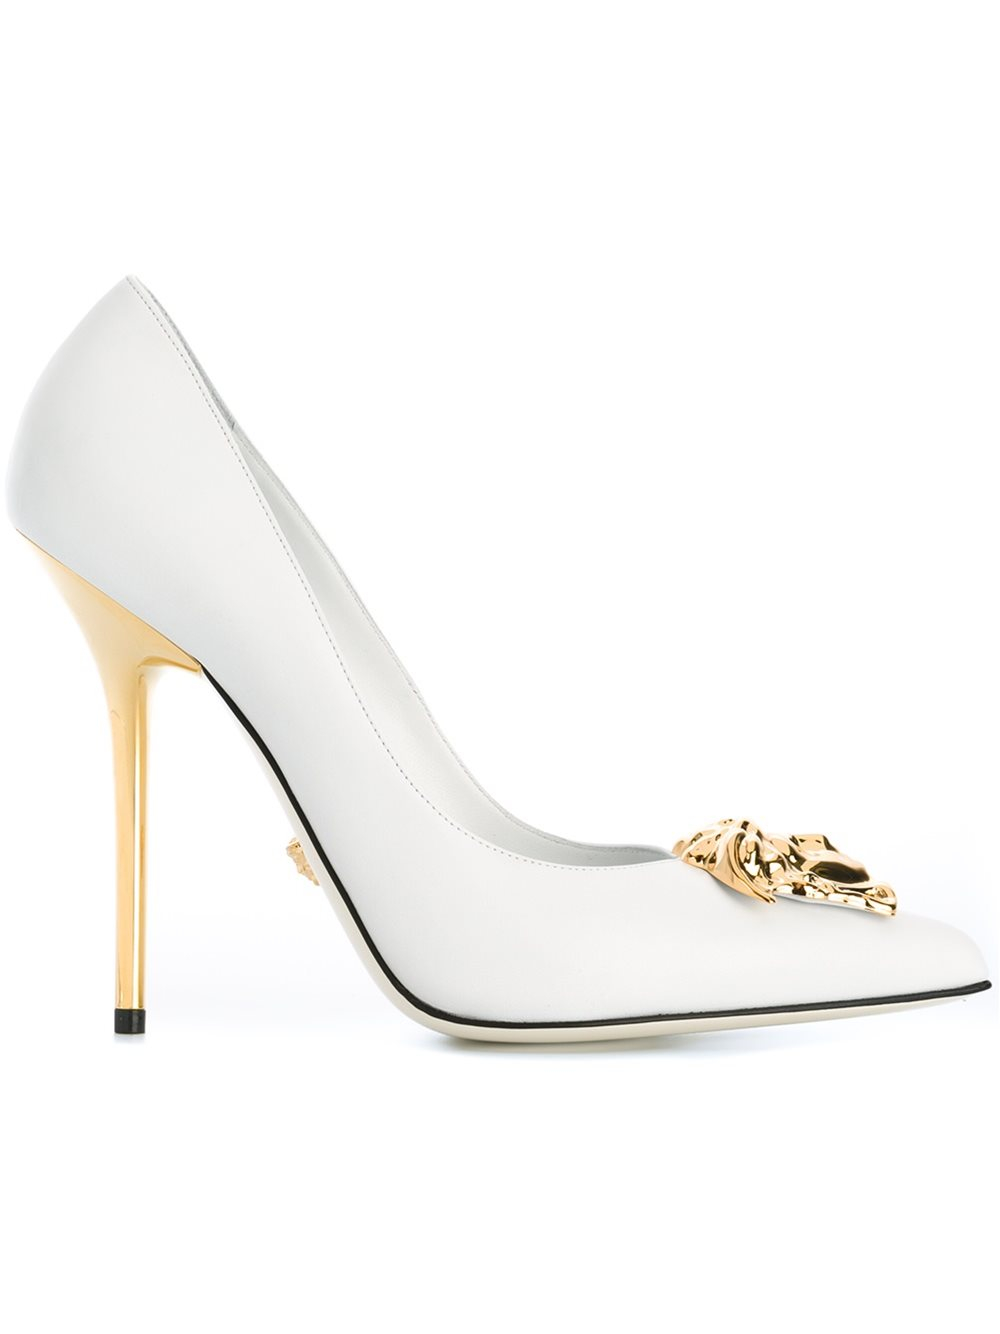 Versace Leather Medusa Pumps in White - Lyst